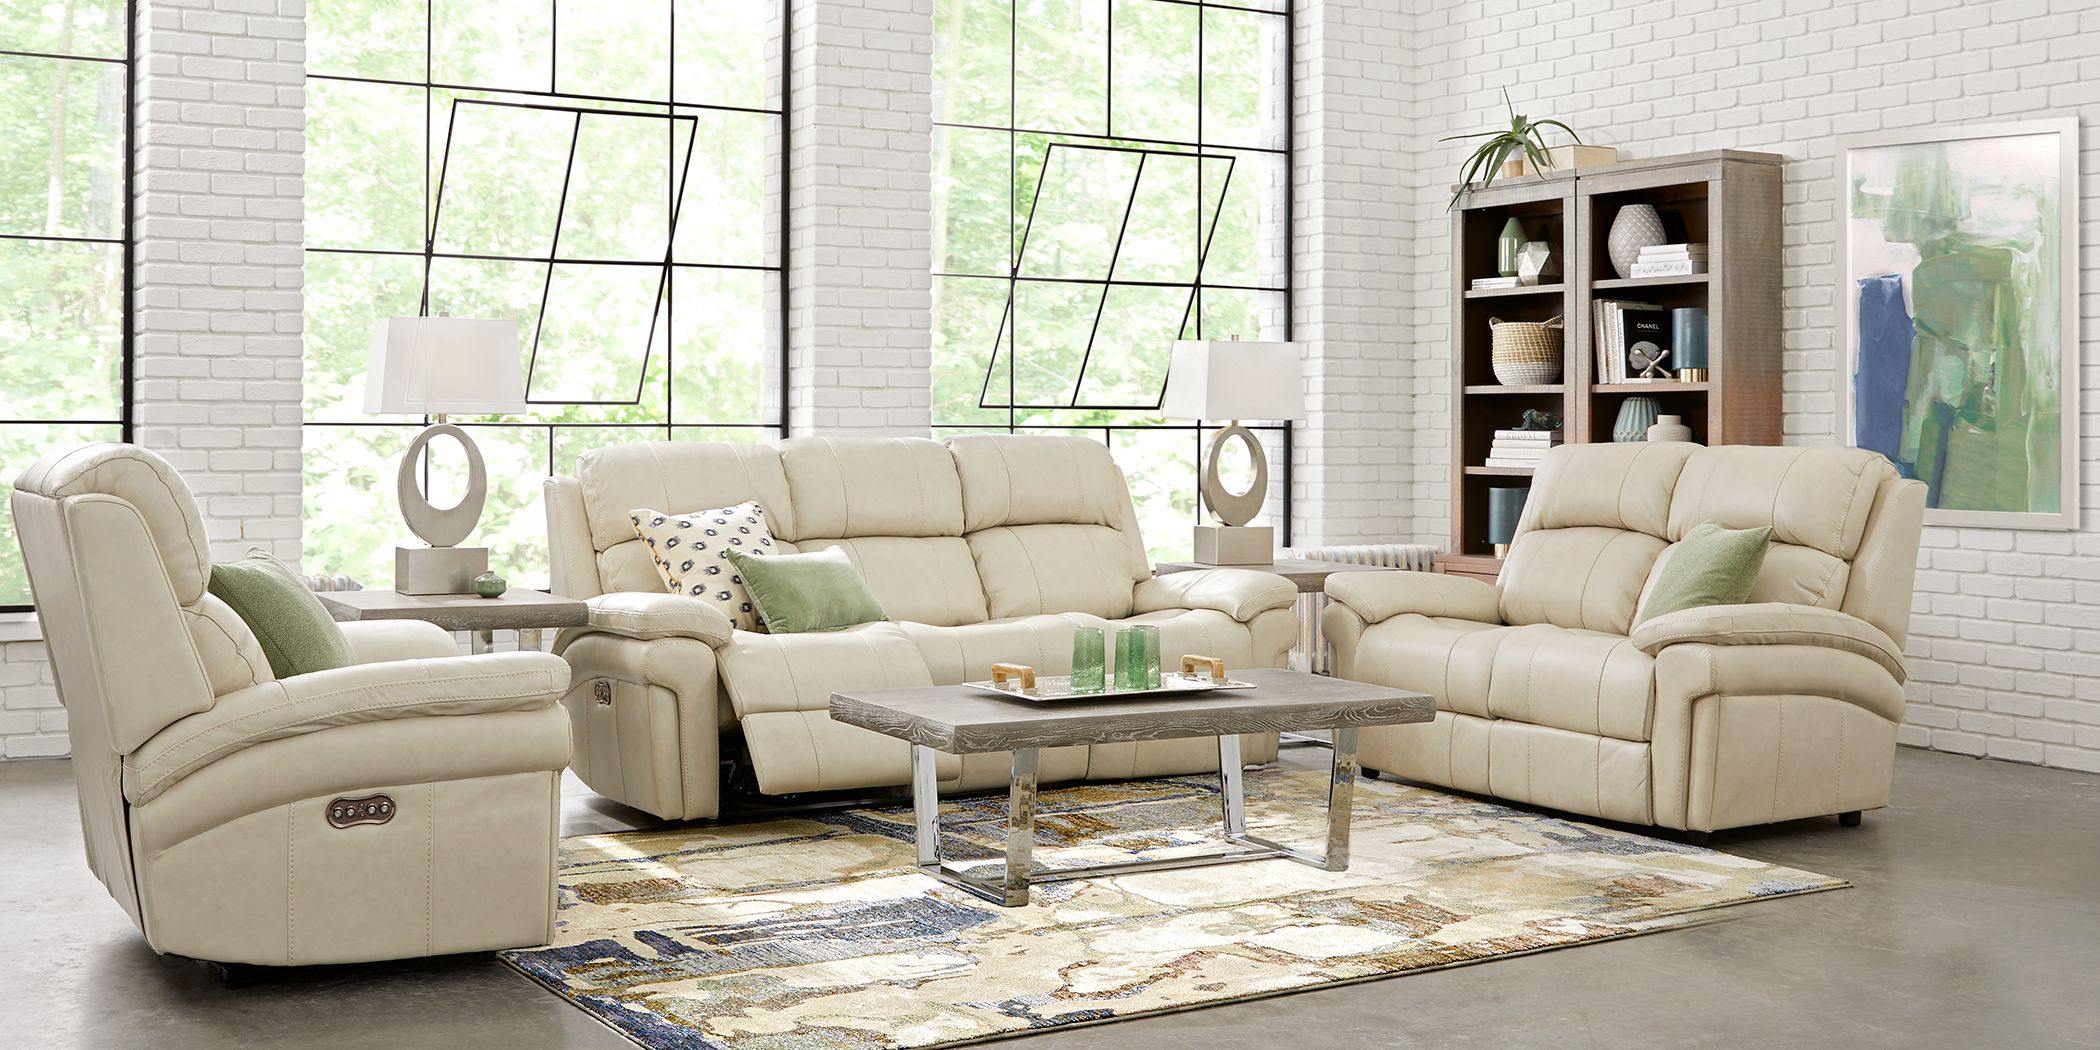 Trevino Place Cream Leather 5 Pc Living Room with Reclining Sofa ...